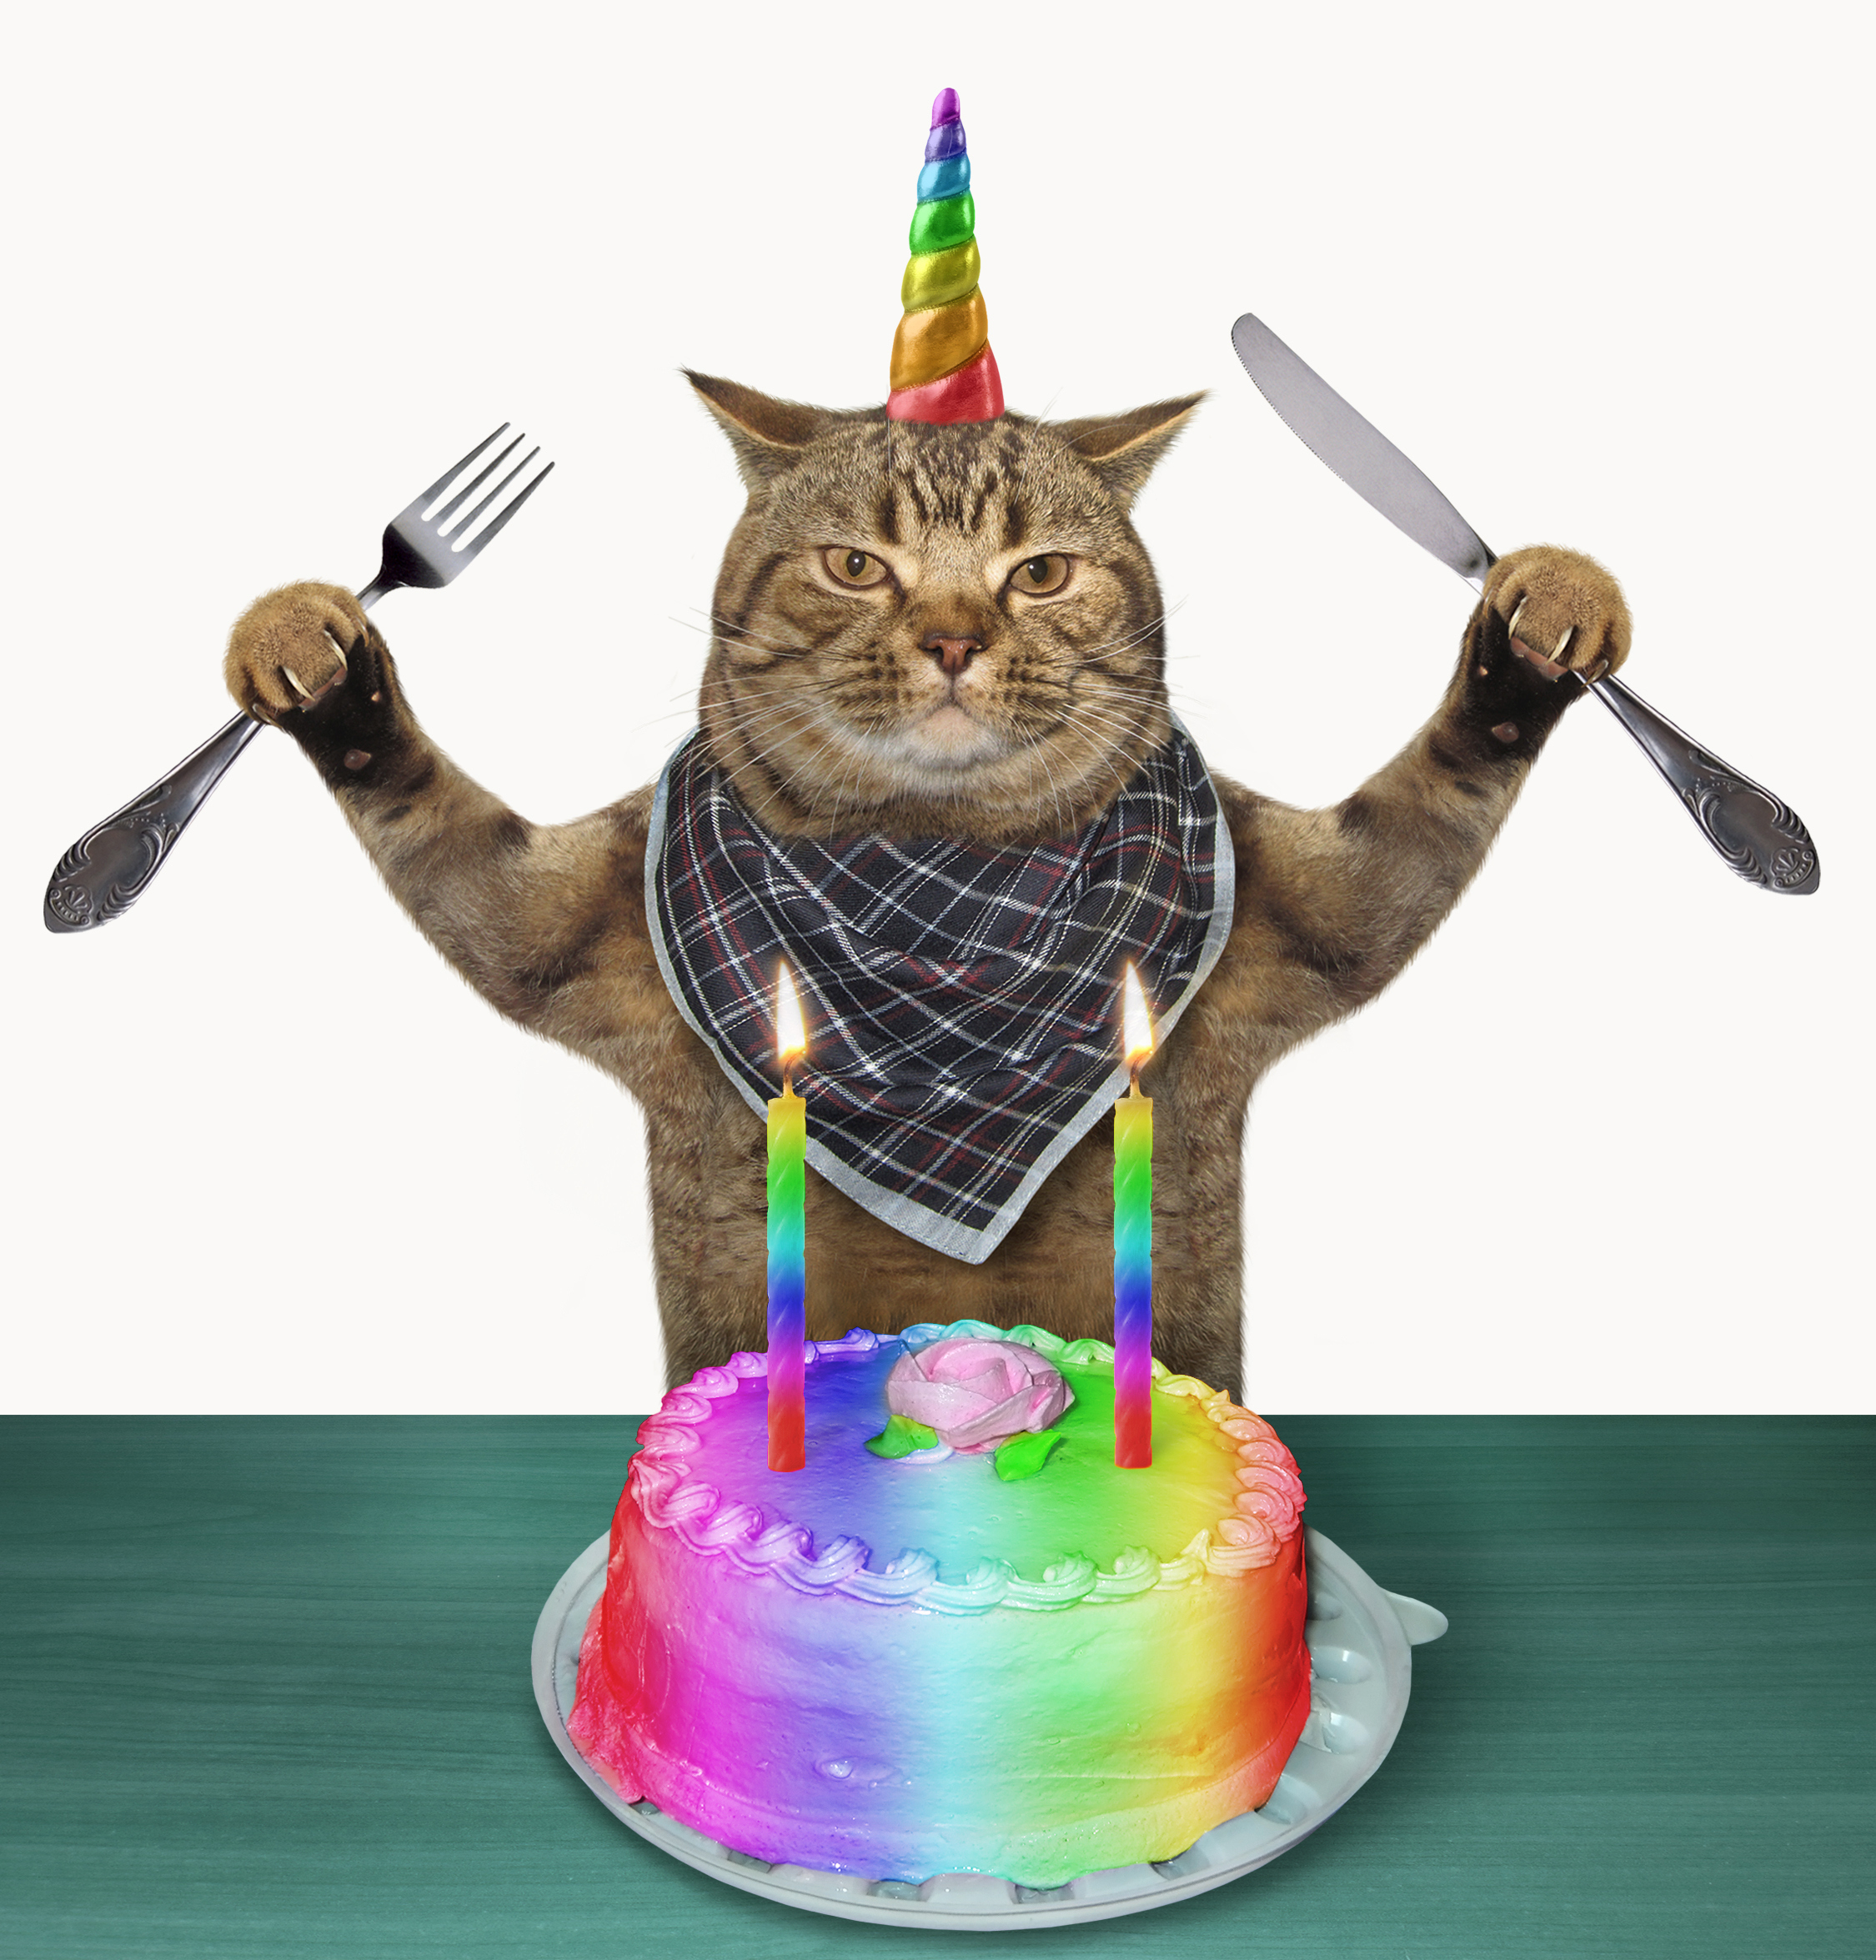 A cat holding a knife and fork ready to cut into a rainbow cake